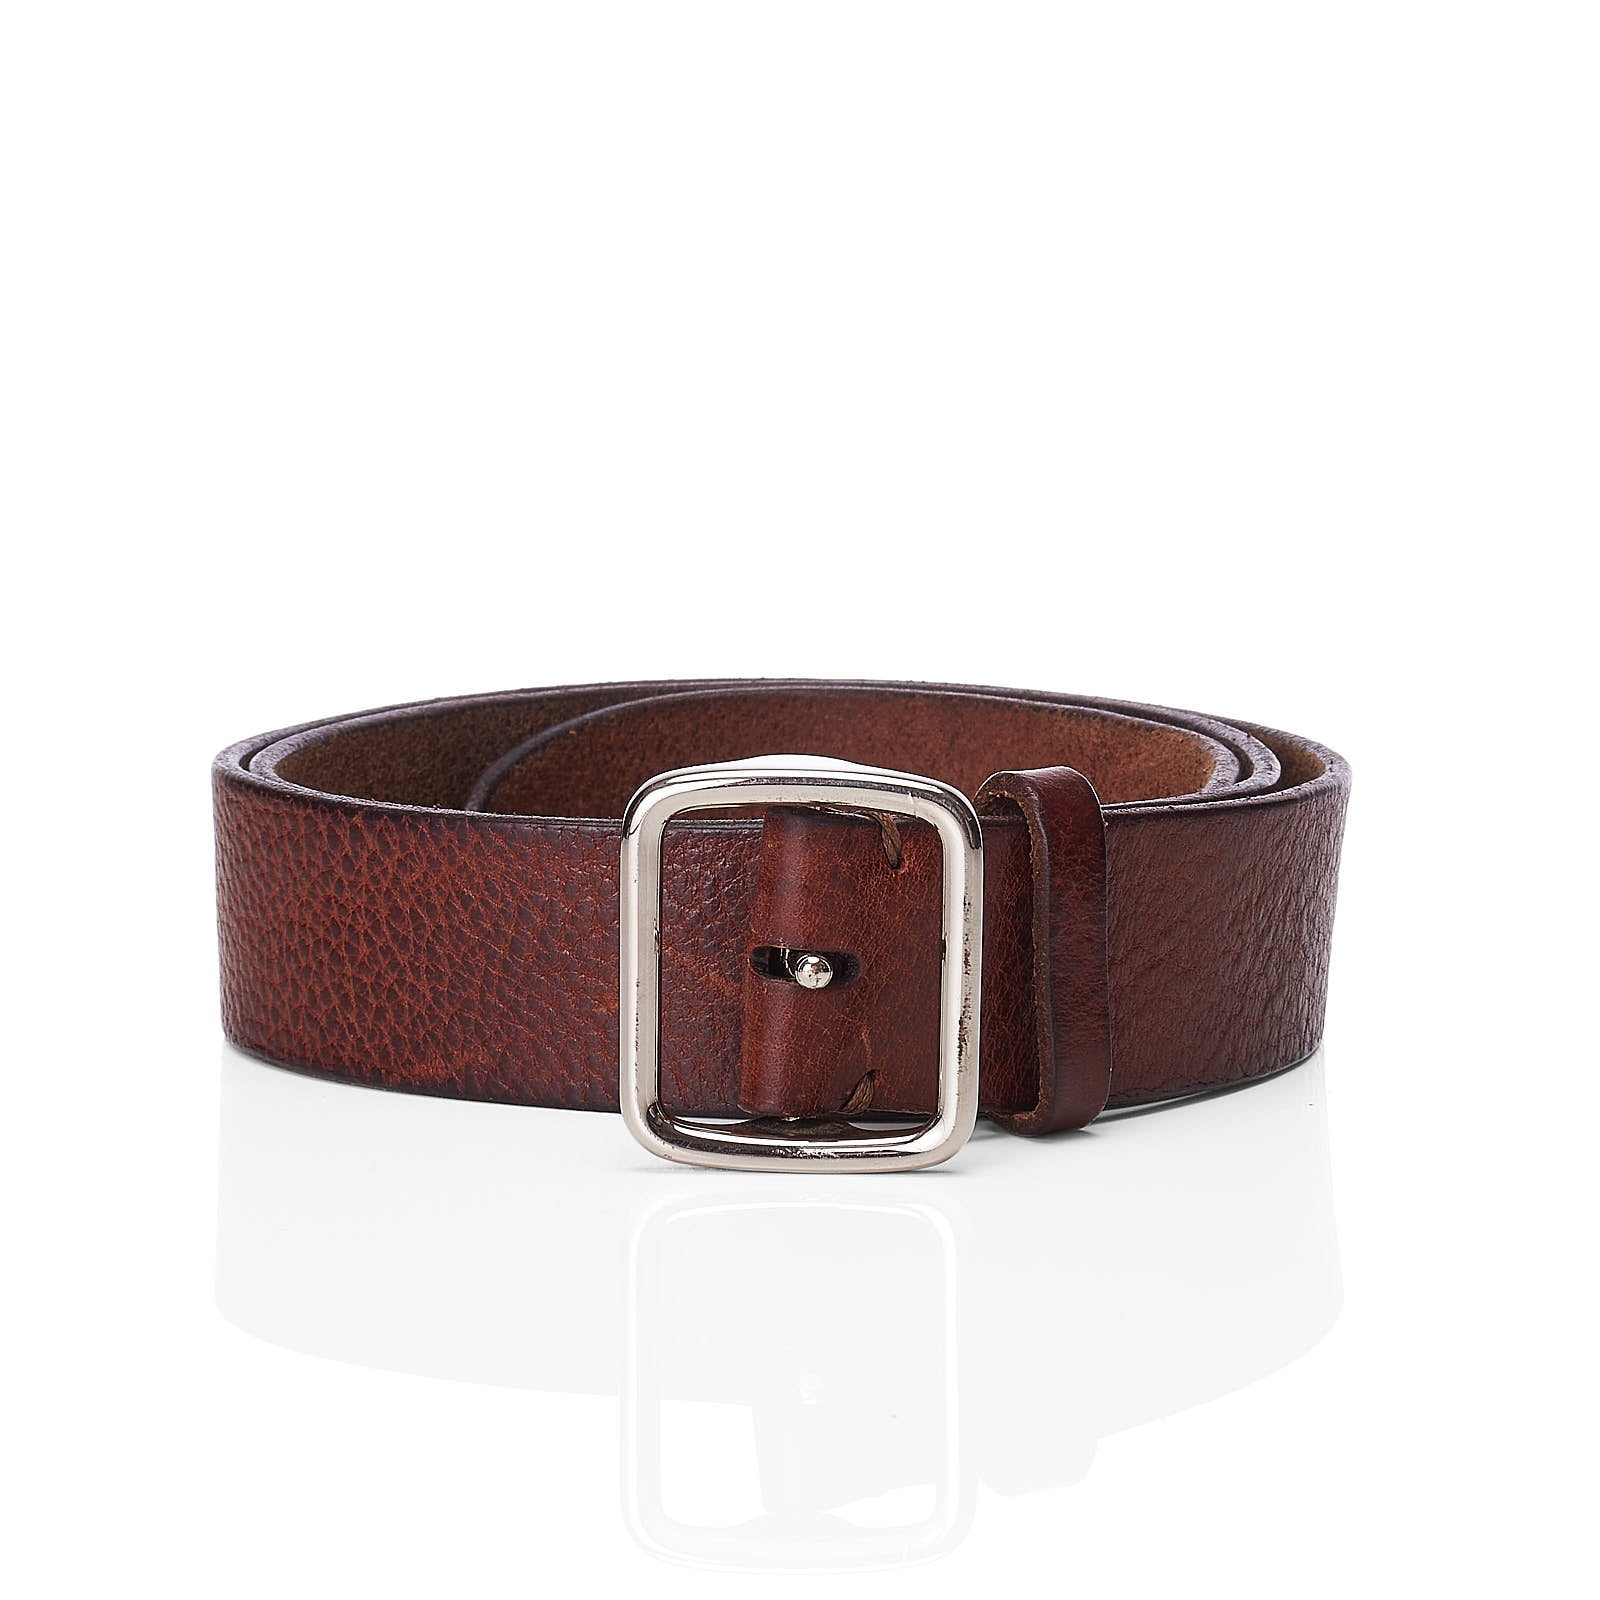 BRUNELLO CUCINELLI  Brown Leather Belt with Silver-Tone Buckle 90cm 36"